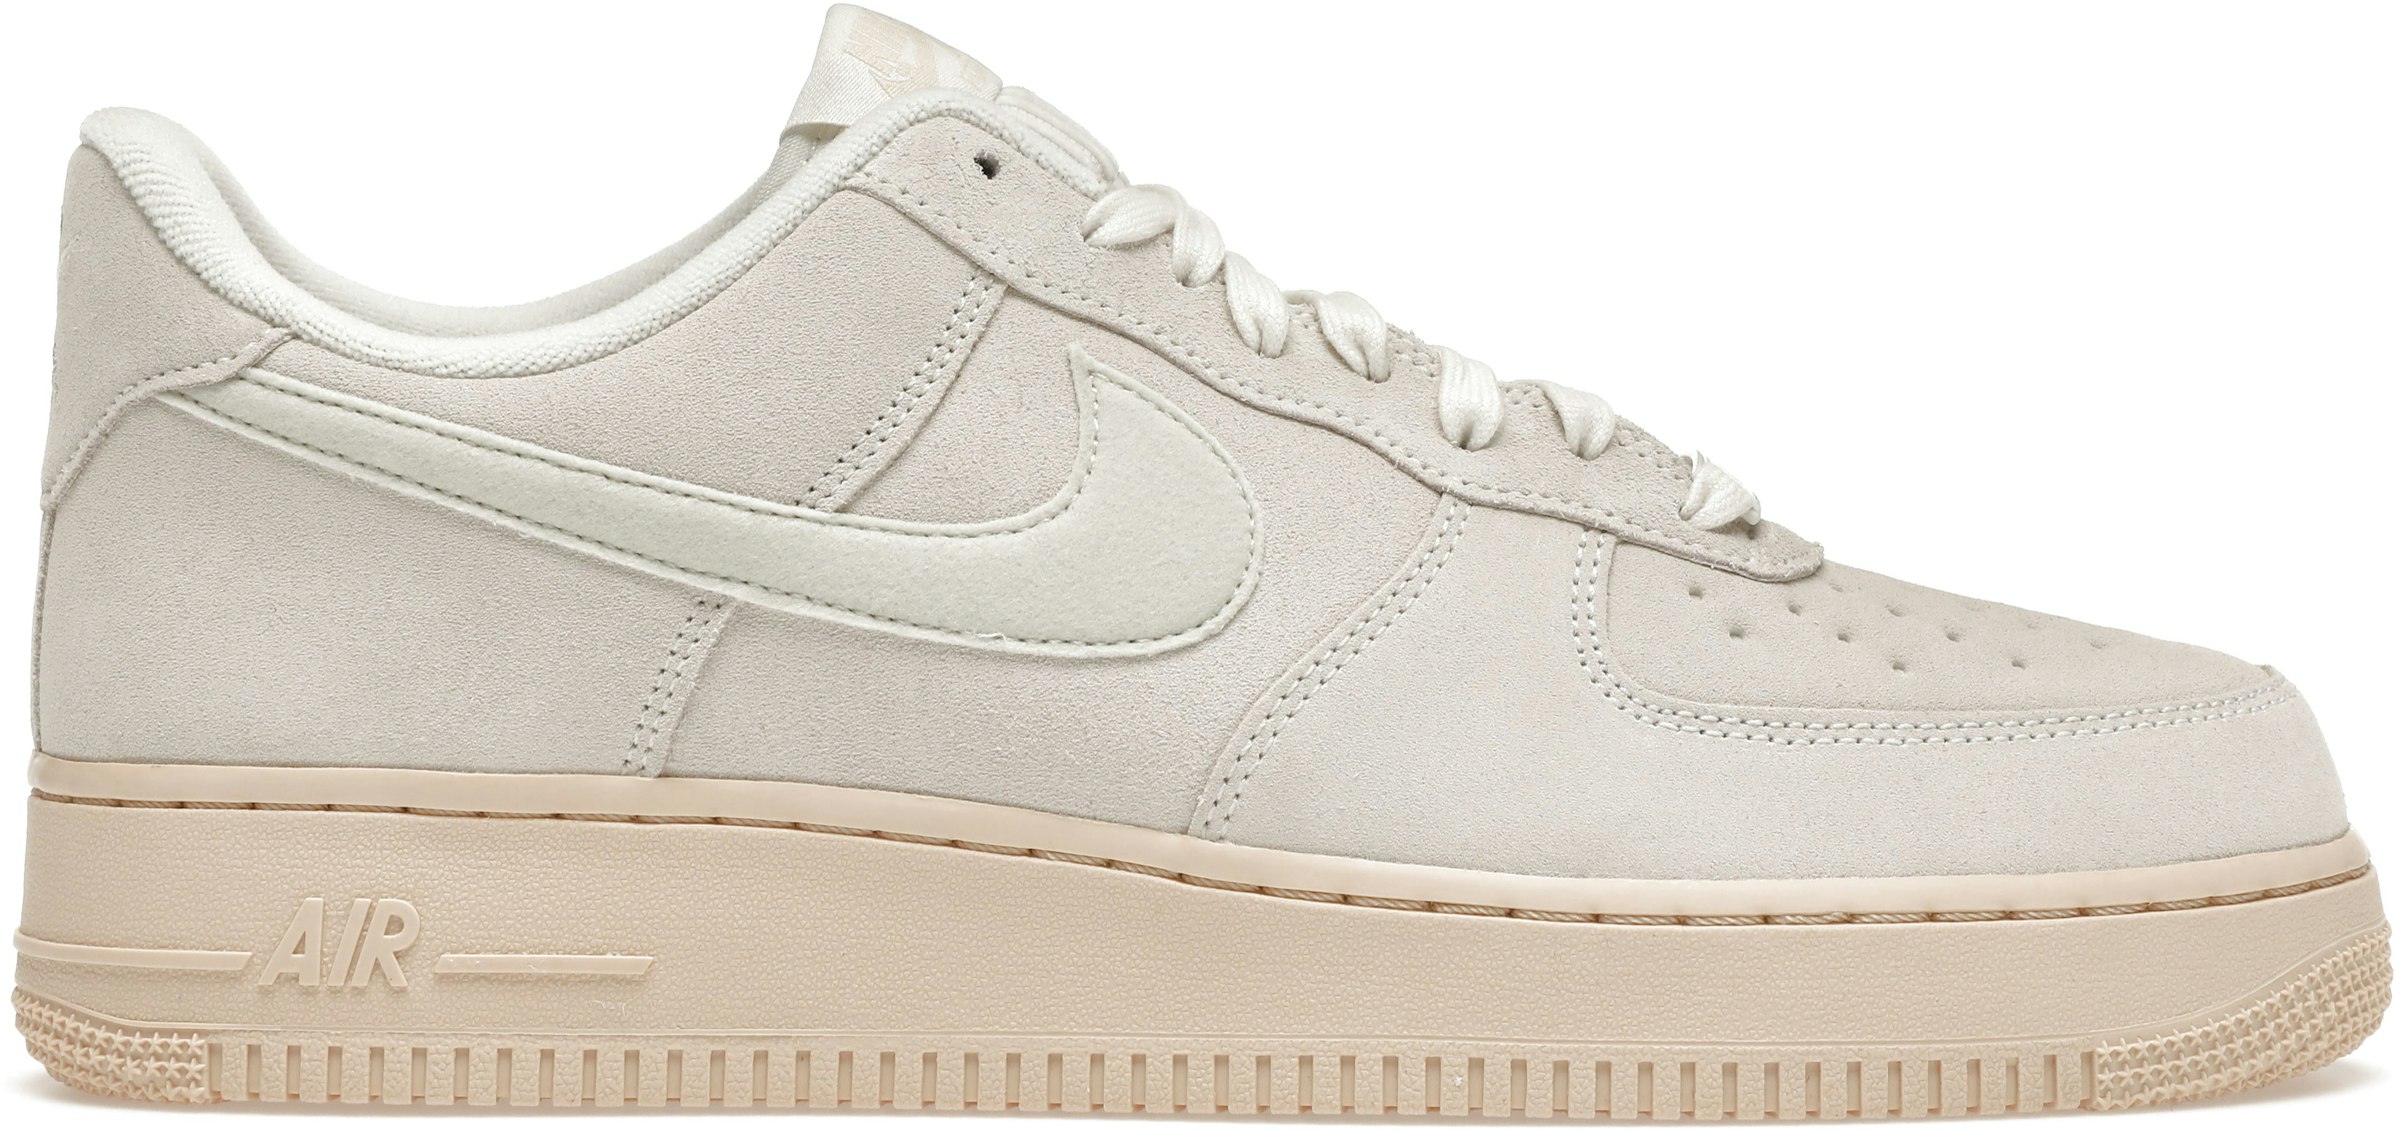 Nike Air Force 1 Low Winter Premium White Suede Men's - DO6730-100 - US